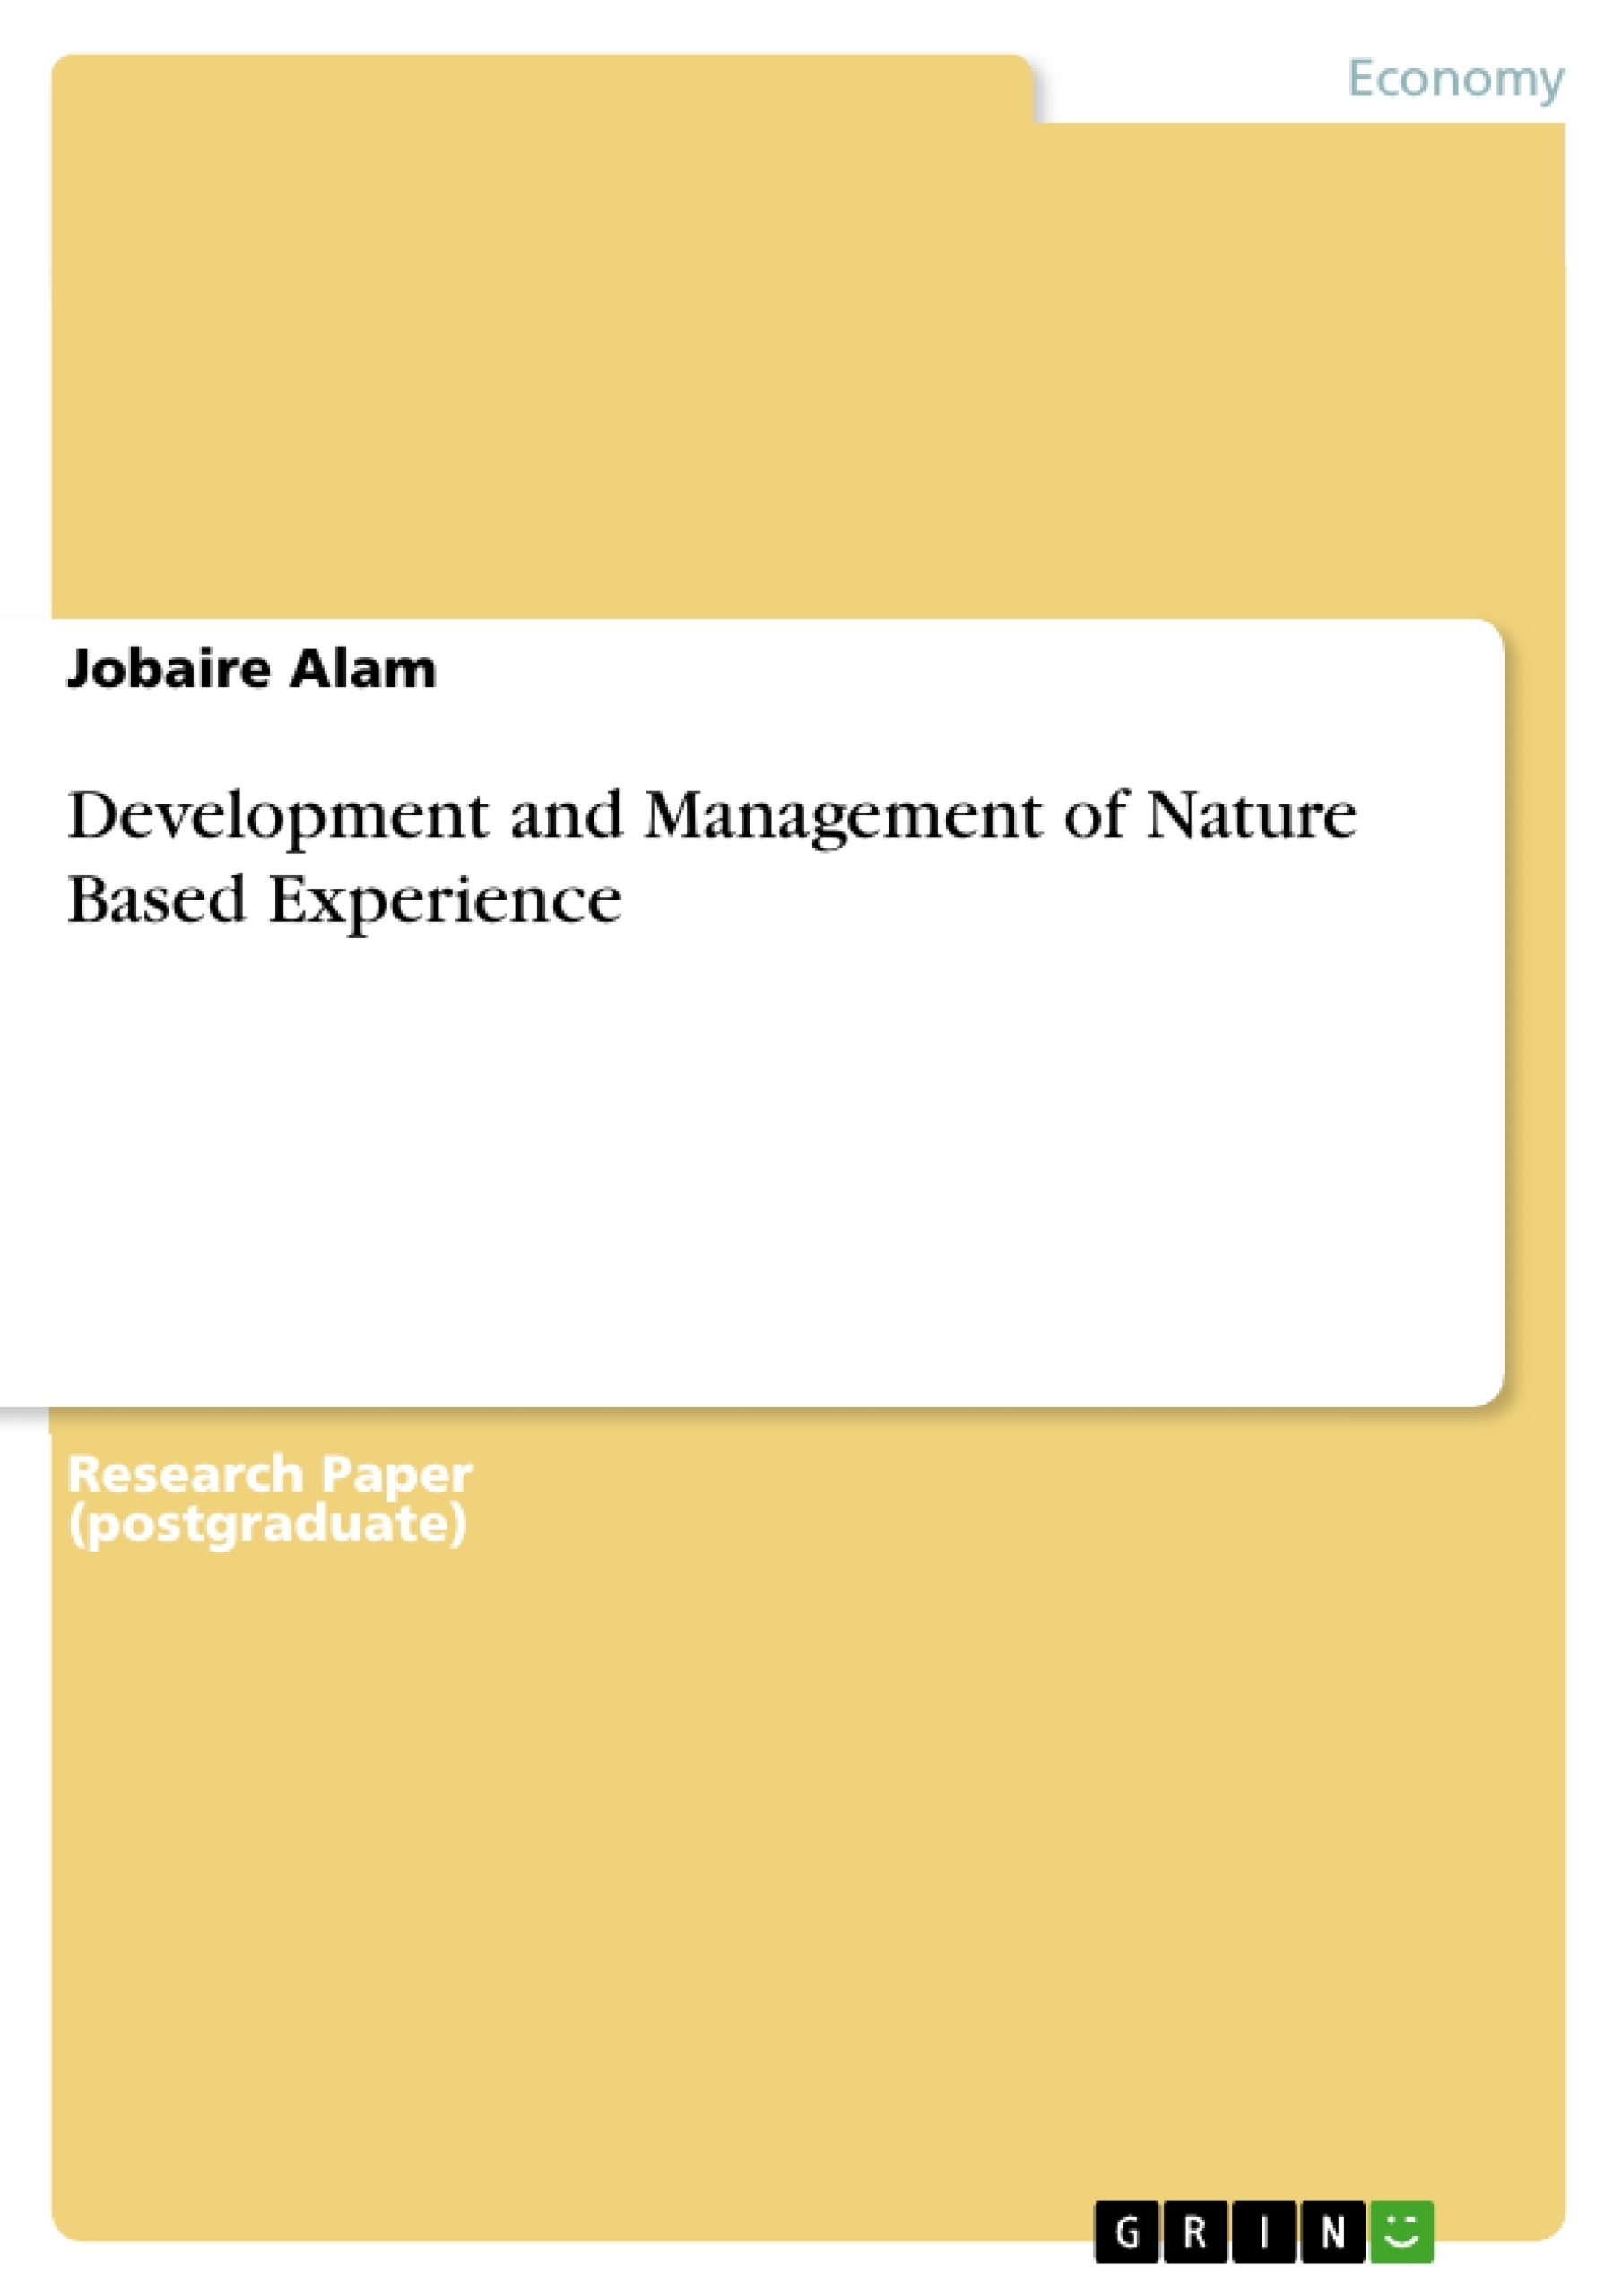 Title: Development and Management of Nature Based Experience